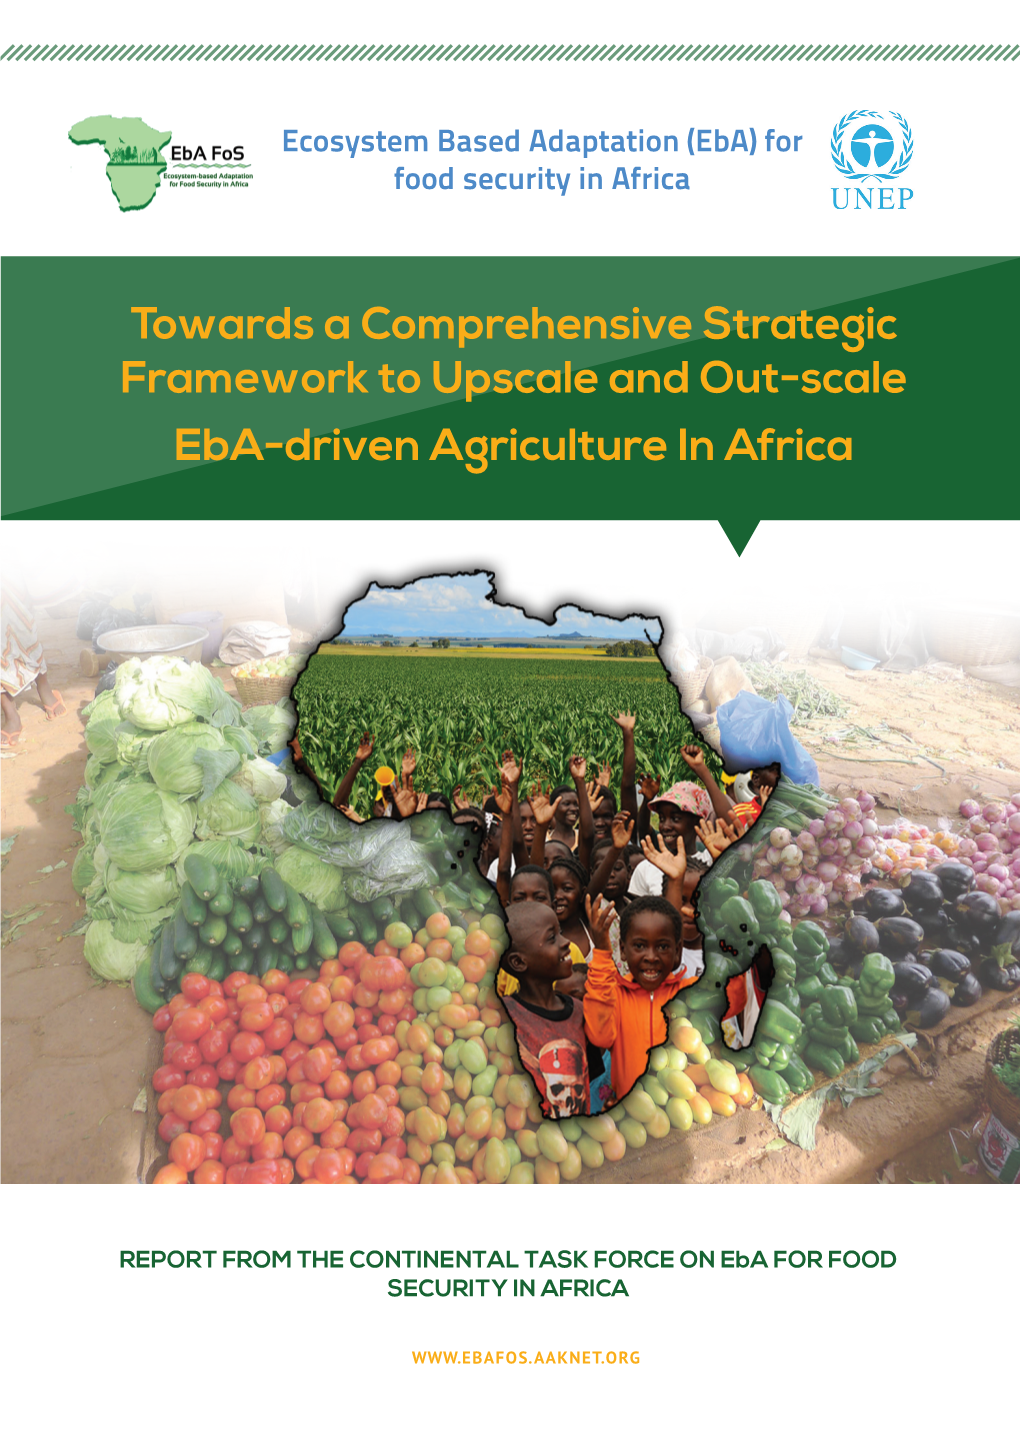 Towards a Comprehensive Strategic Framework to Upscale and Out-Scale Eba-Driven Agriculture in Africa